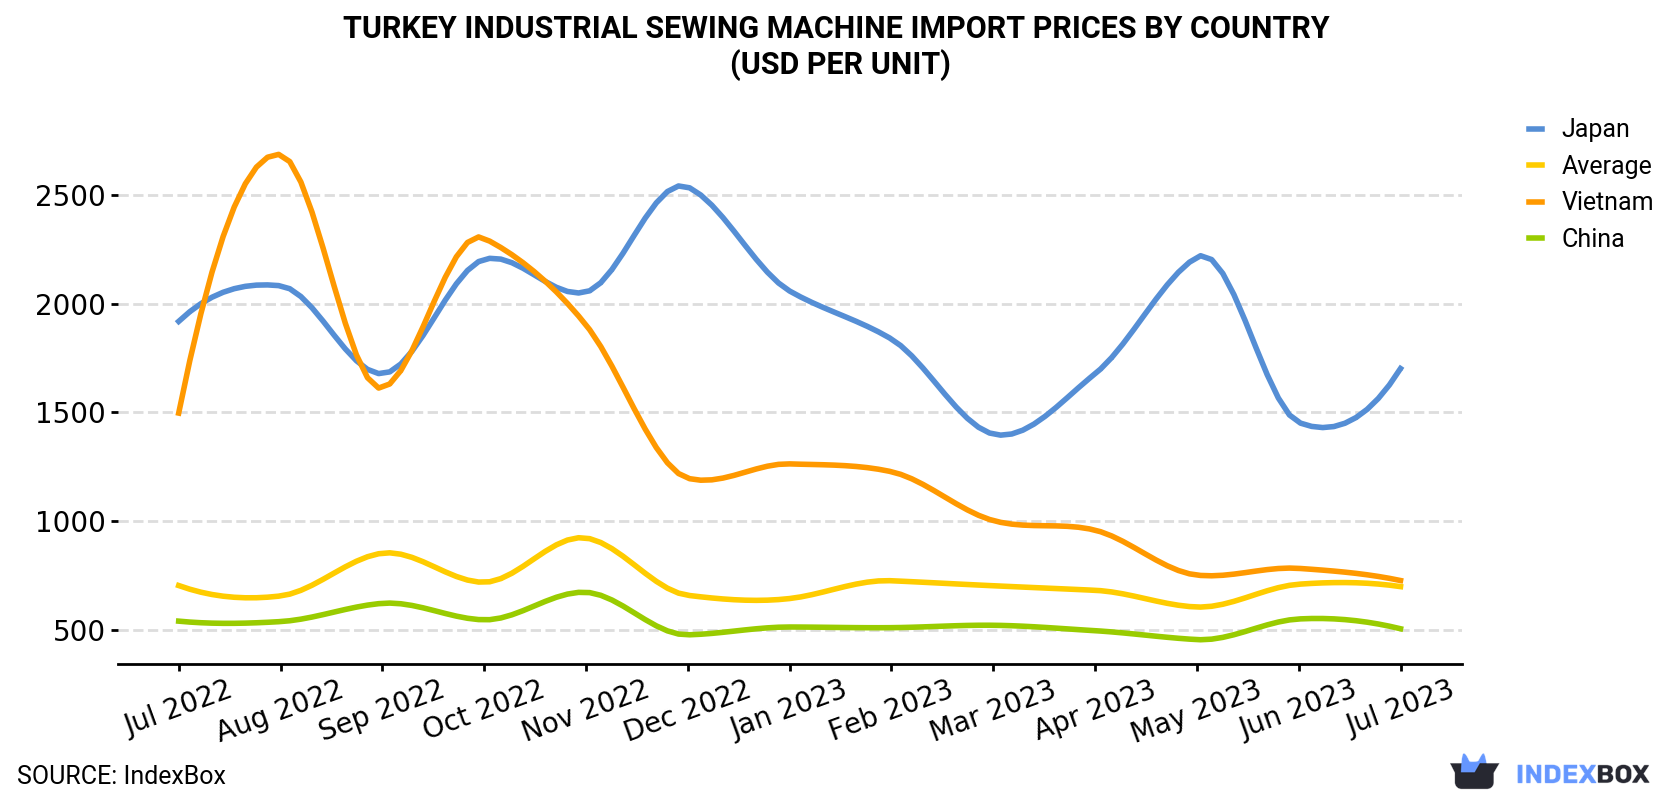 Turkey Industrial Sewing Machine Import Prices By Country (USD Per Unit)